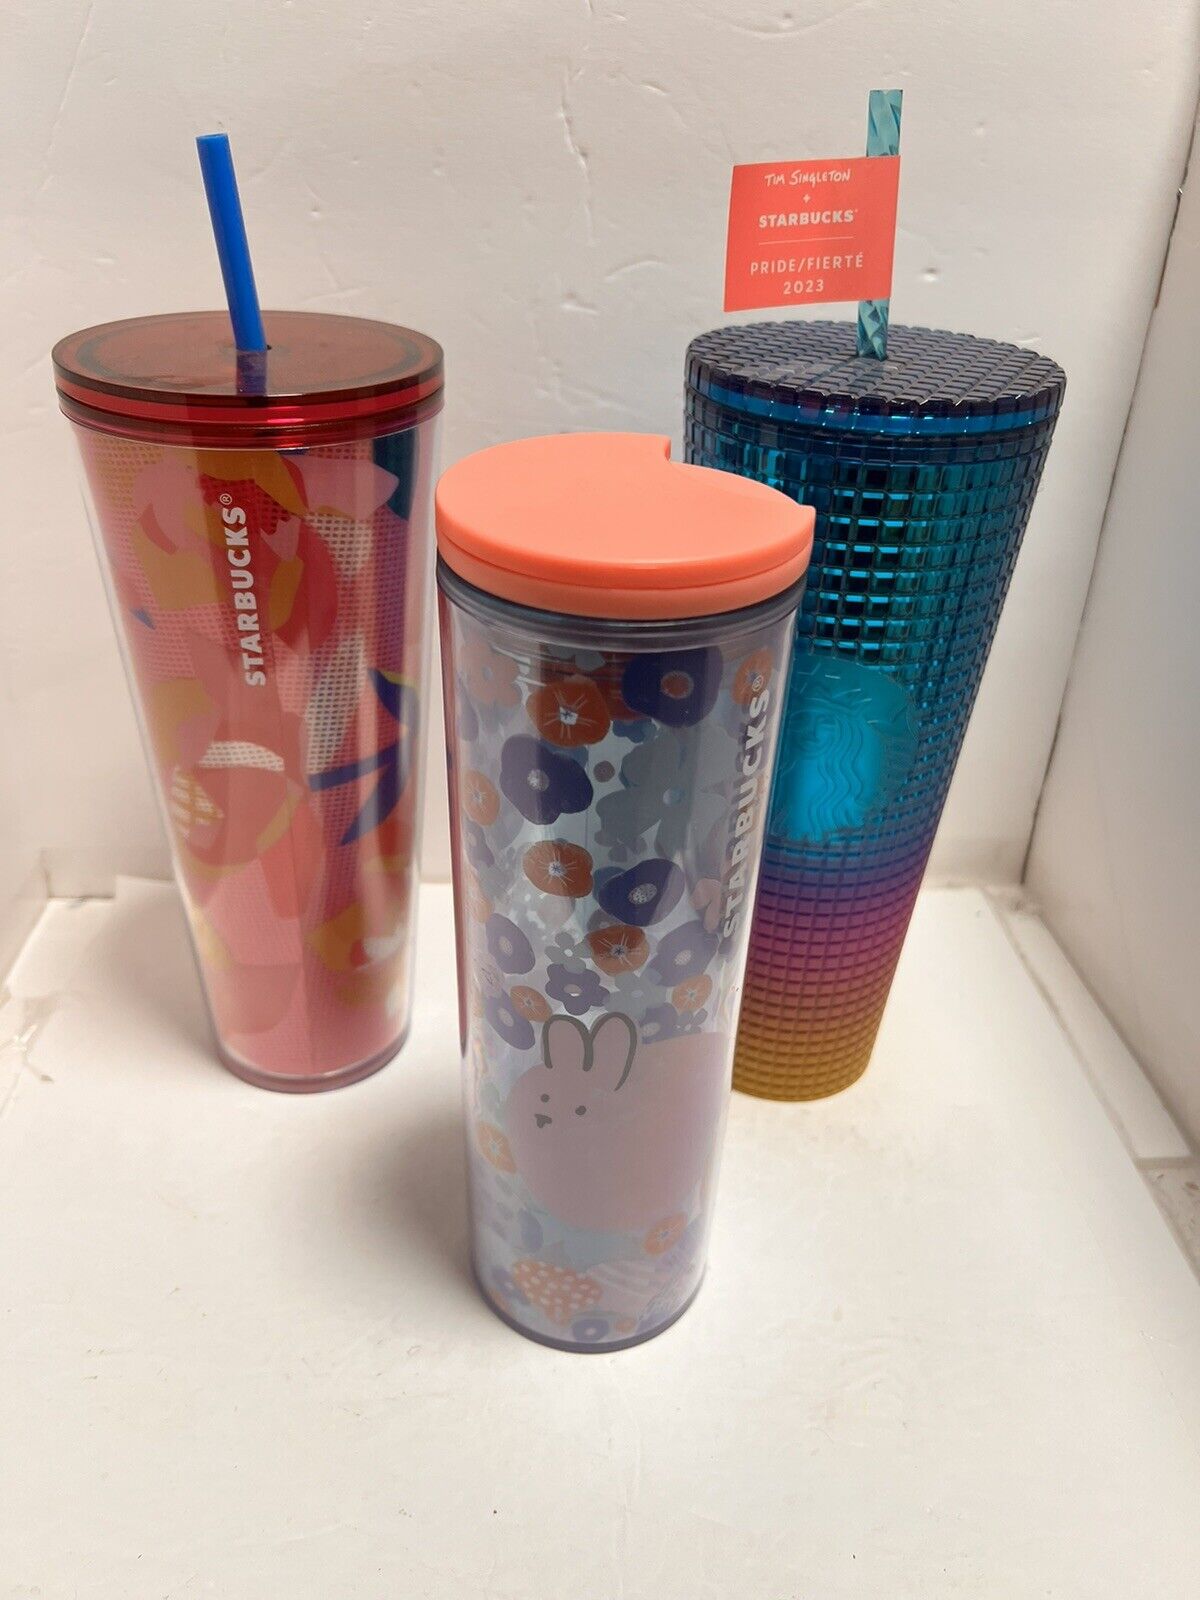 Lot of 3 Starbucks Tumblers They are new.